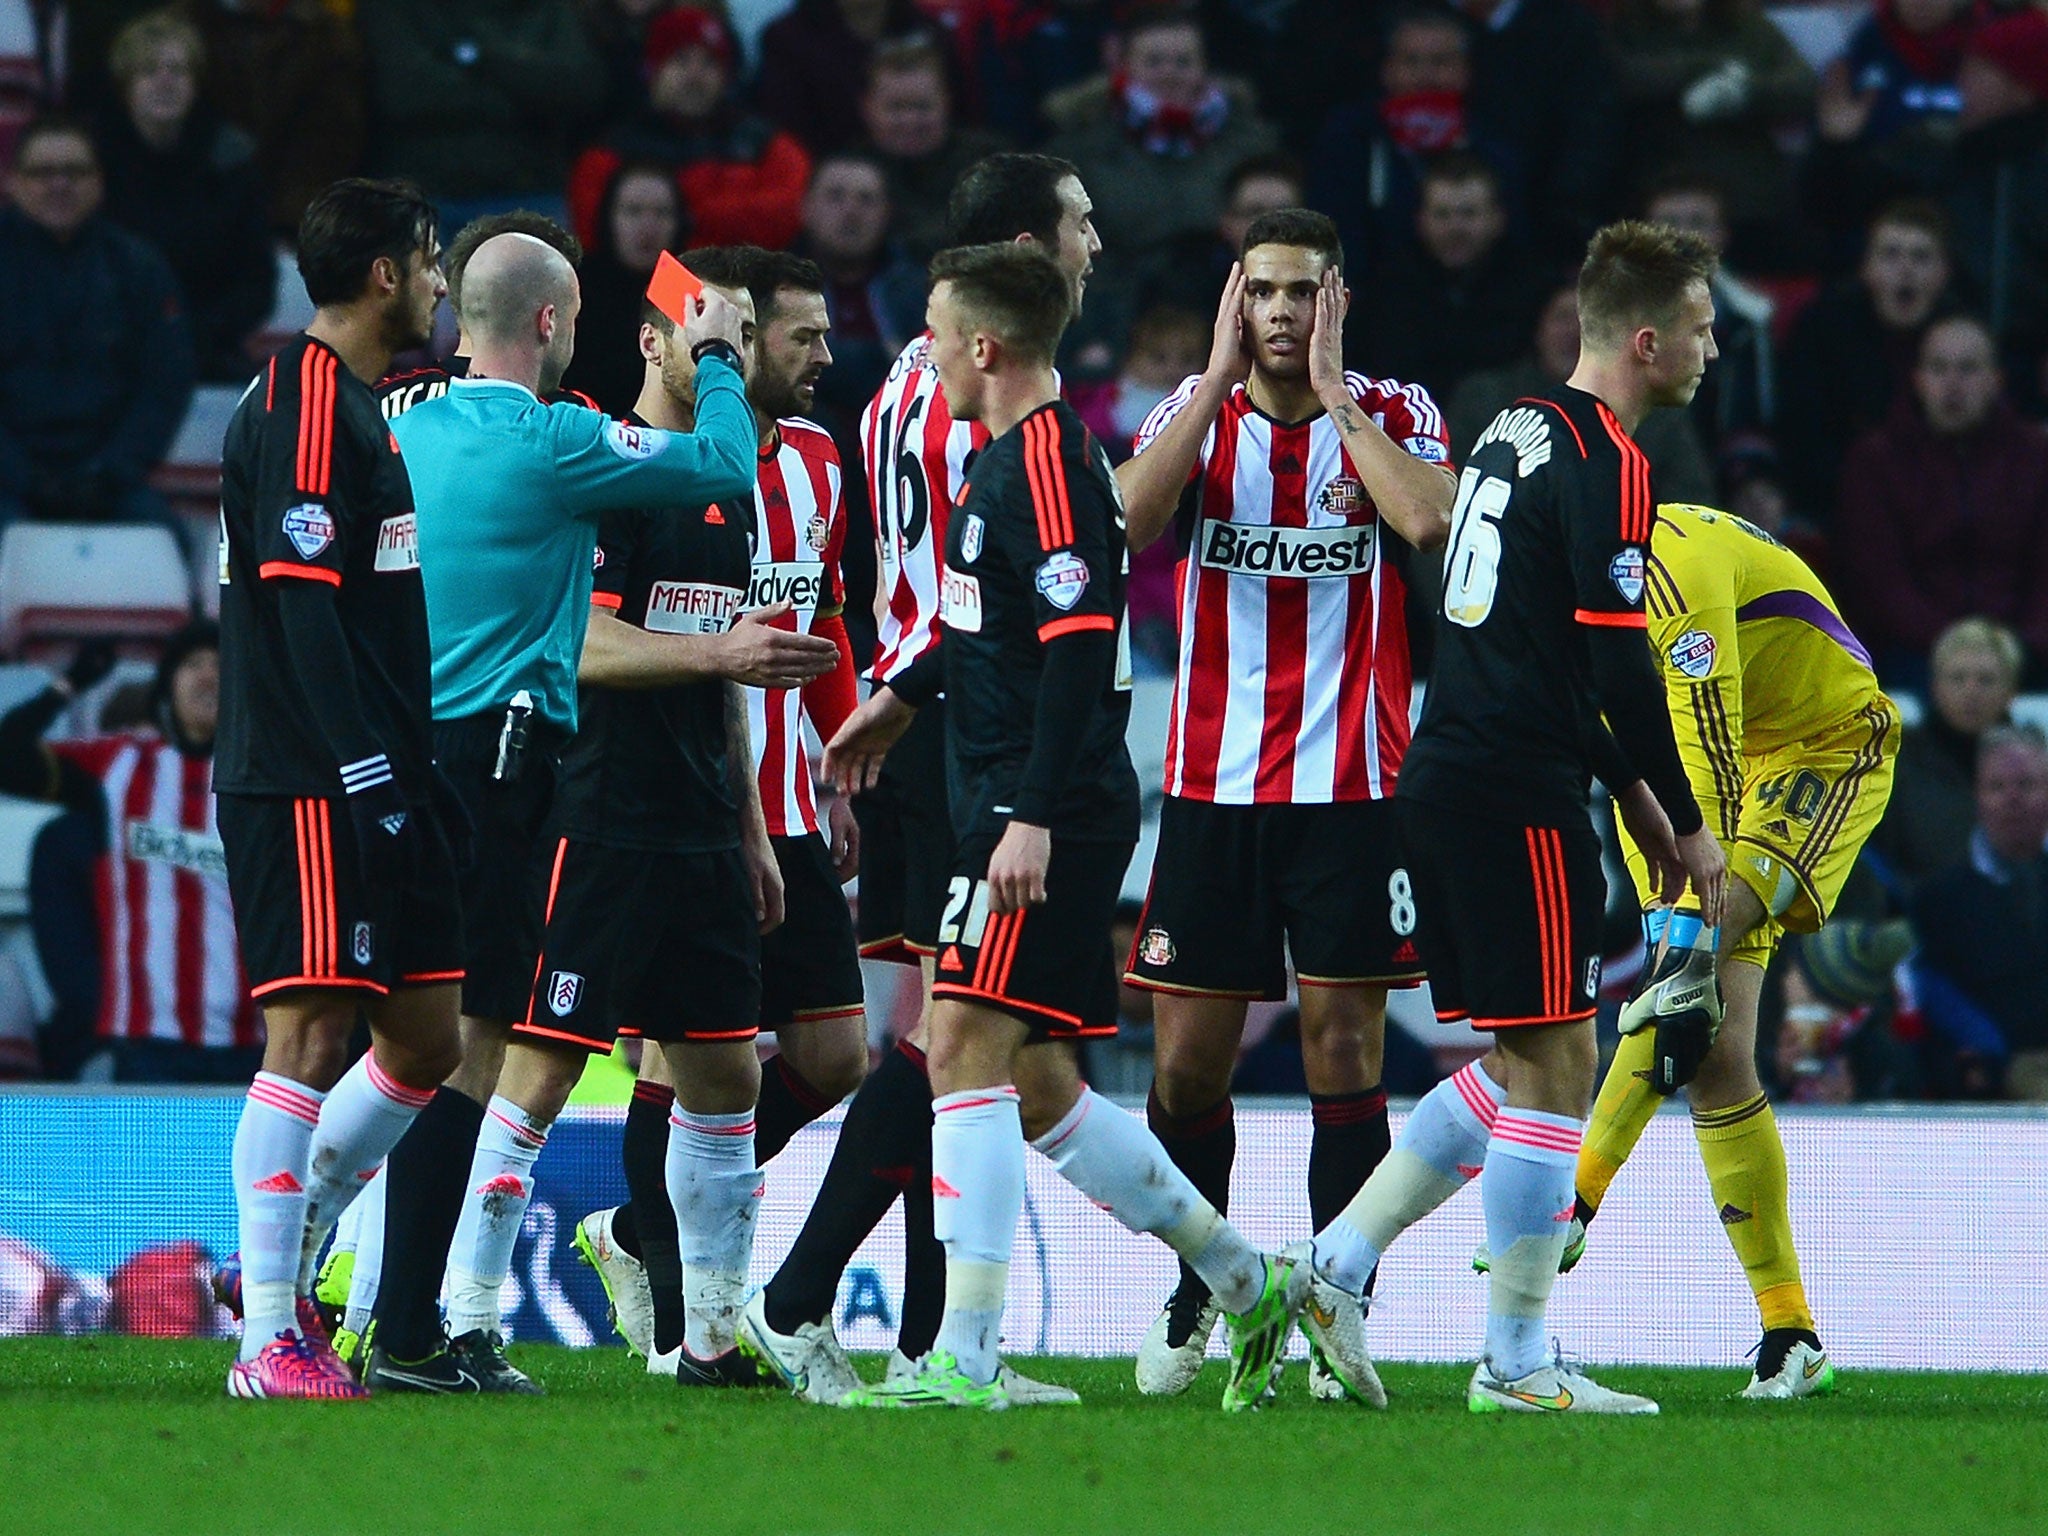 Jack Rodwell is sent-off after picking up his second booking